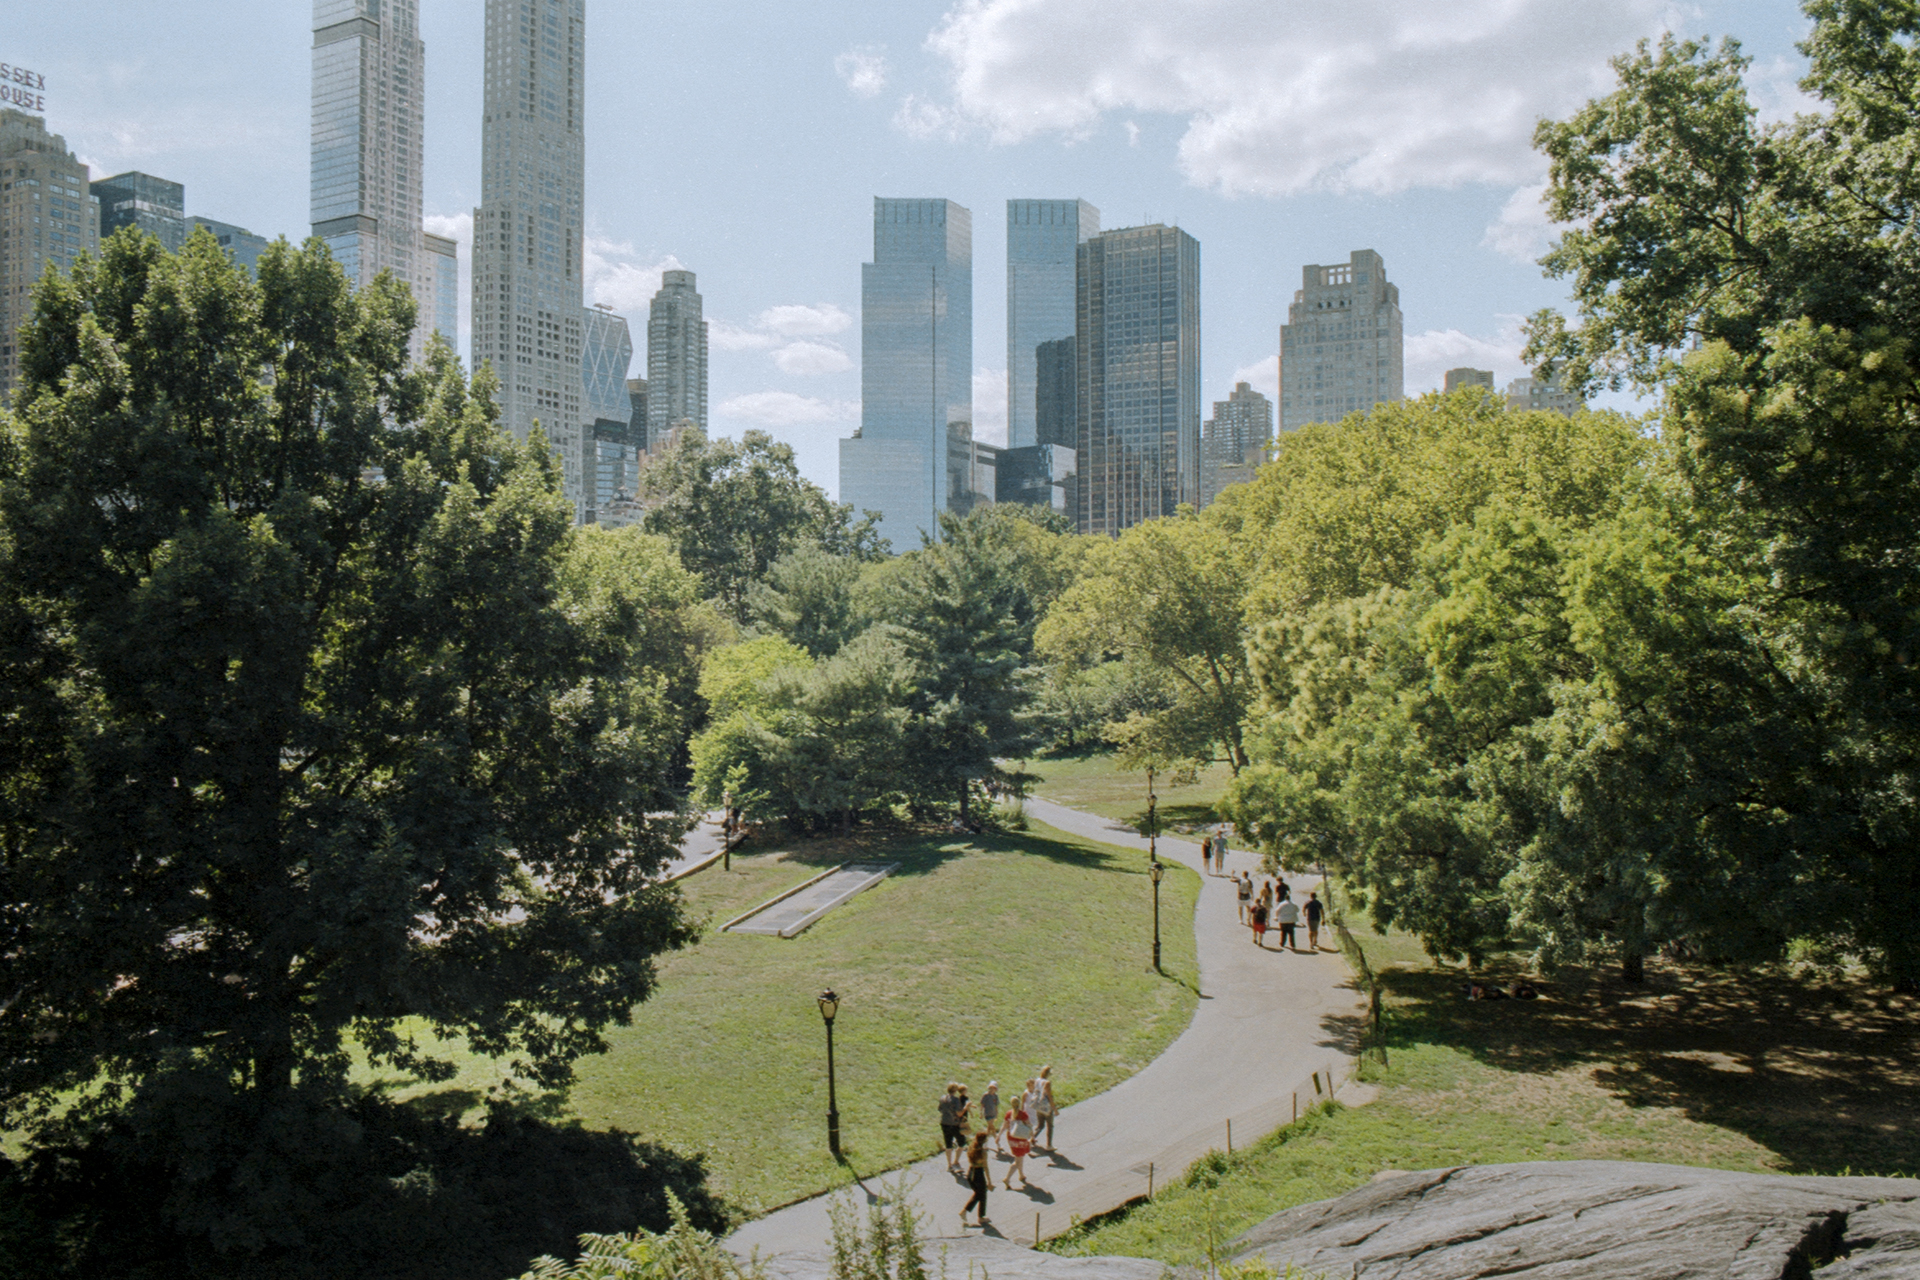 A colour image of a pathway in Central Park New York. On the S-shaped path are two groups of people walking down with a significant space between them. In the background the the Skyscrapers tower above the greenery and plants of Central Park